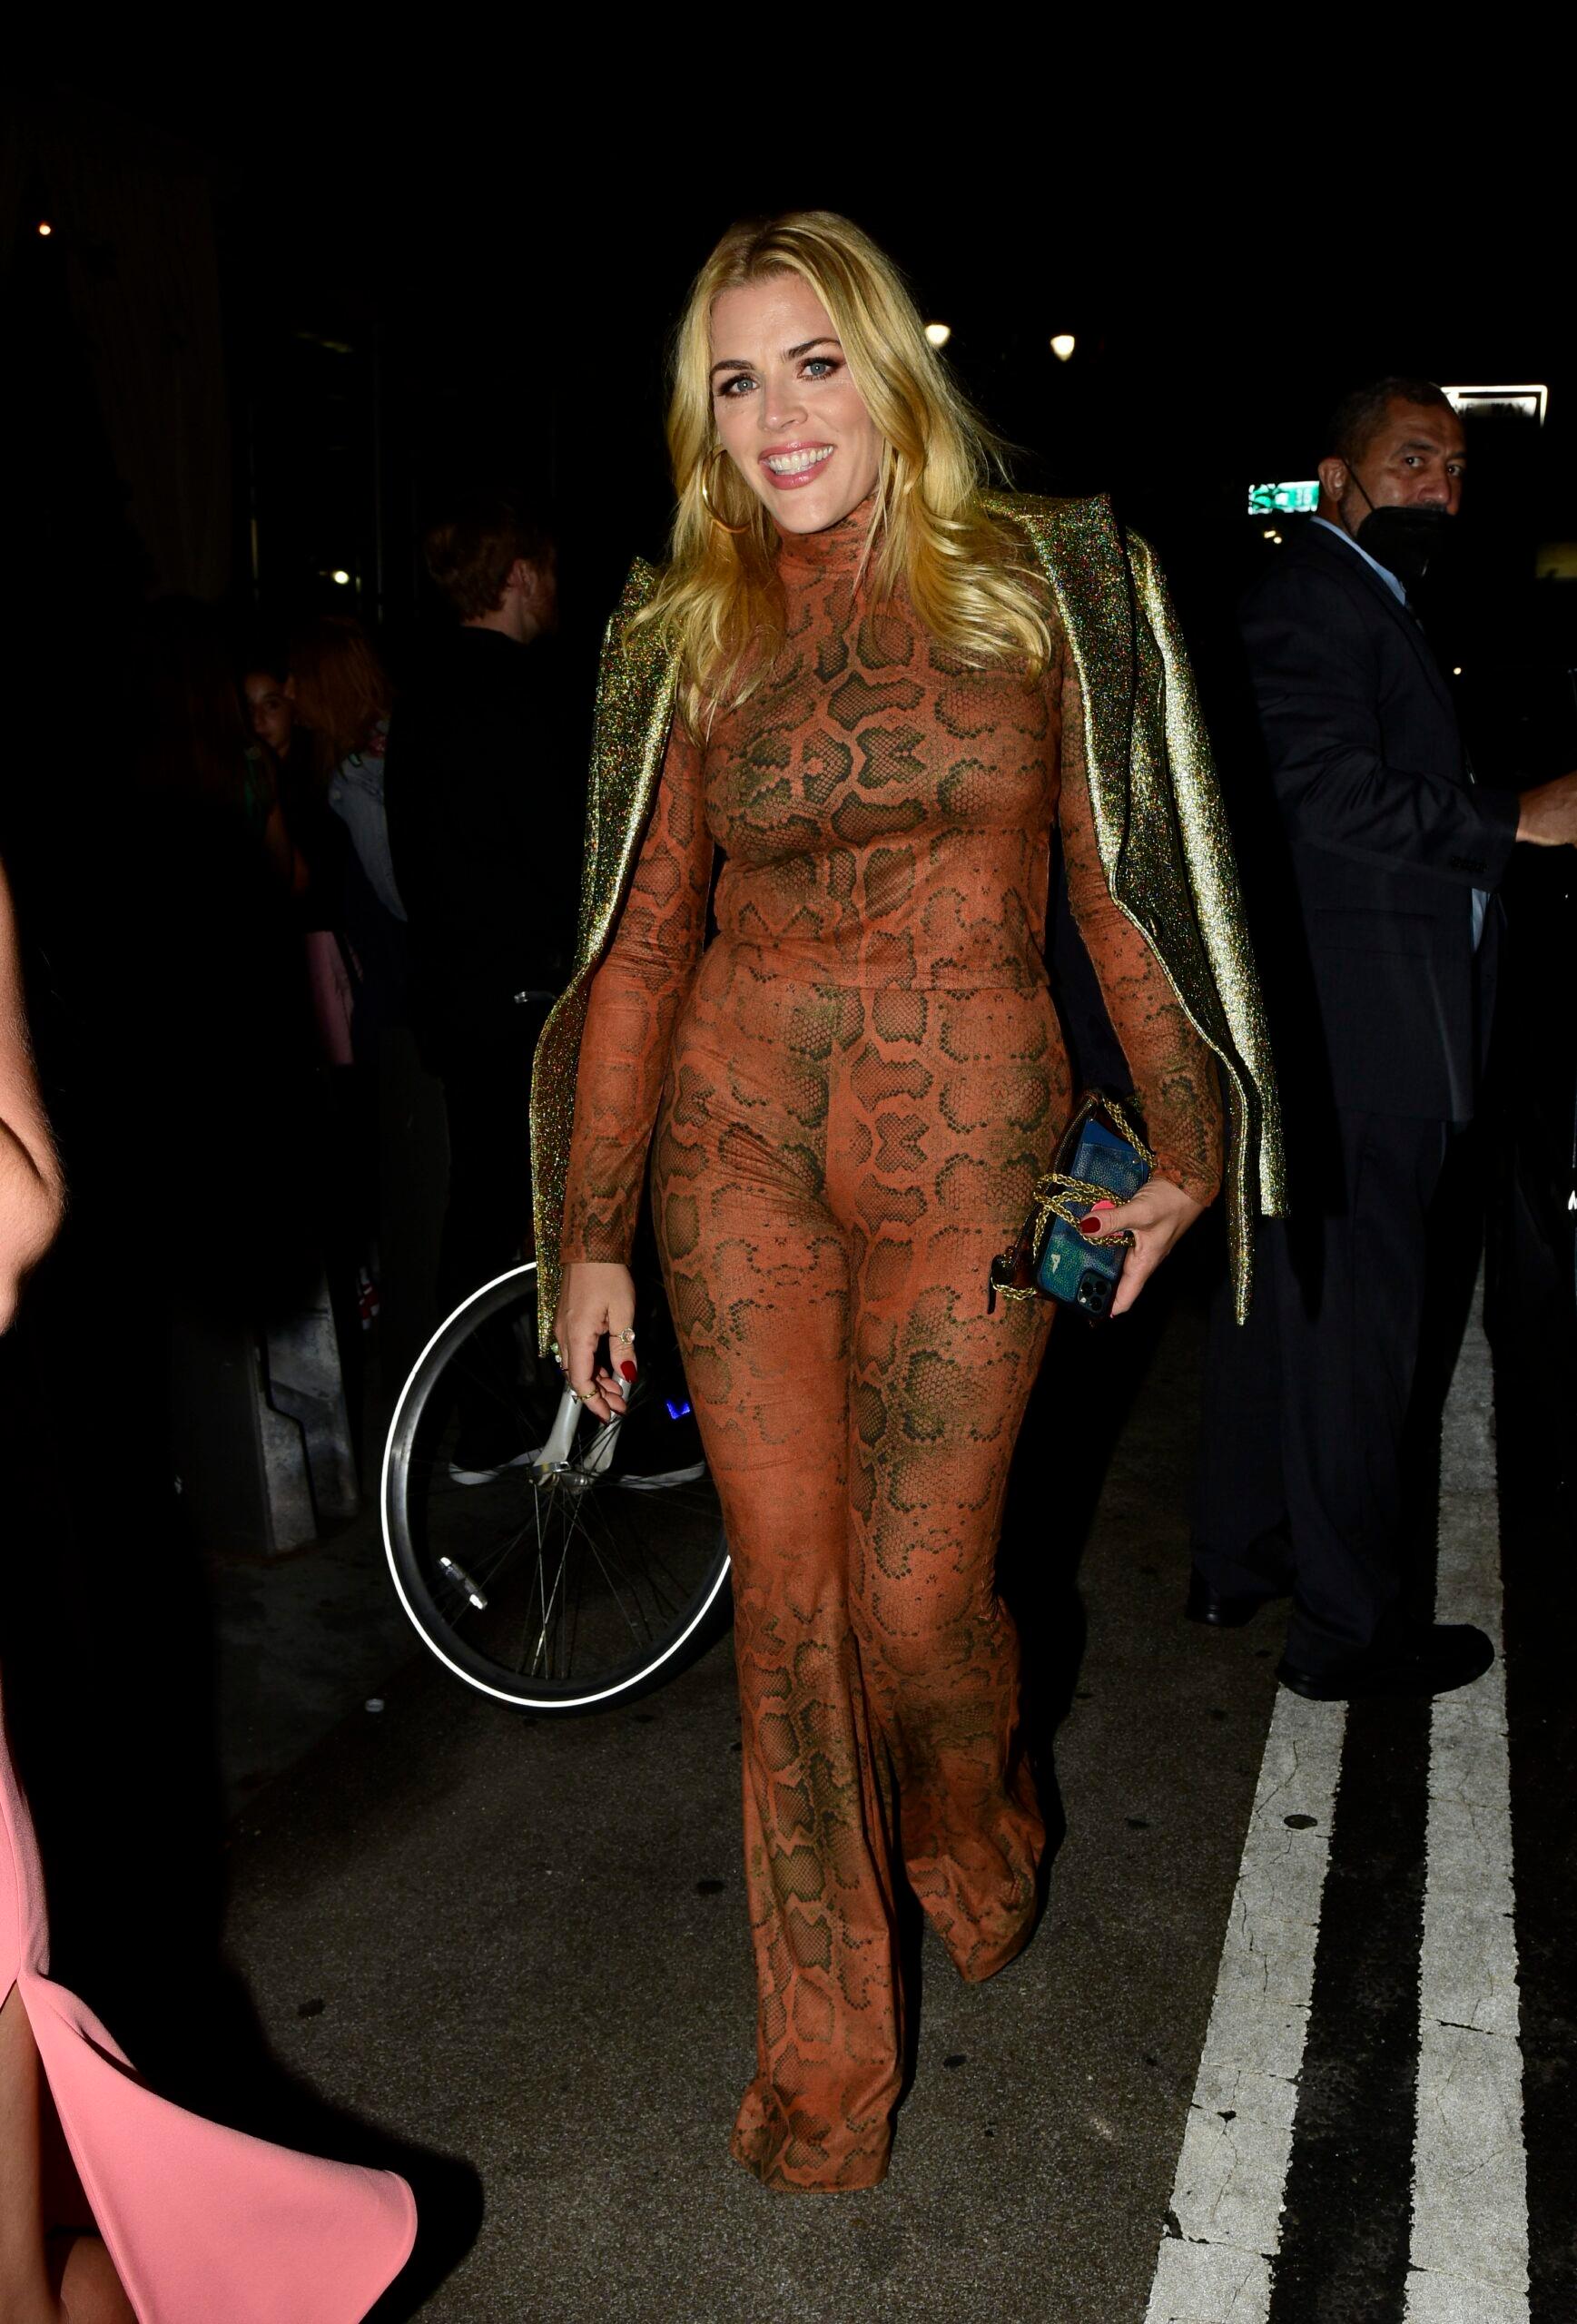 Busy Philipps leaves the 2021 Christian Siriano fashion show in NYC